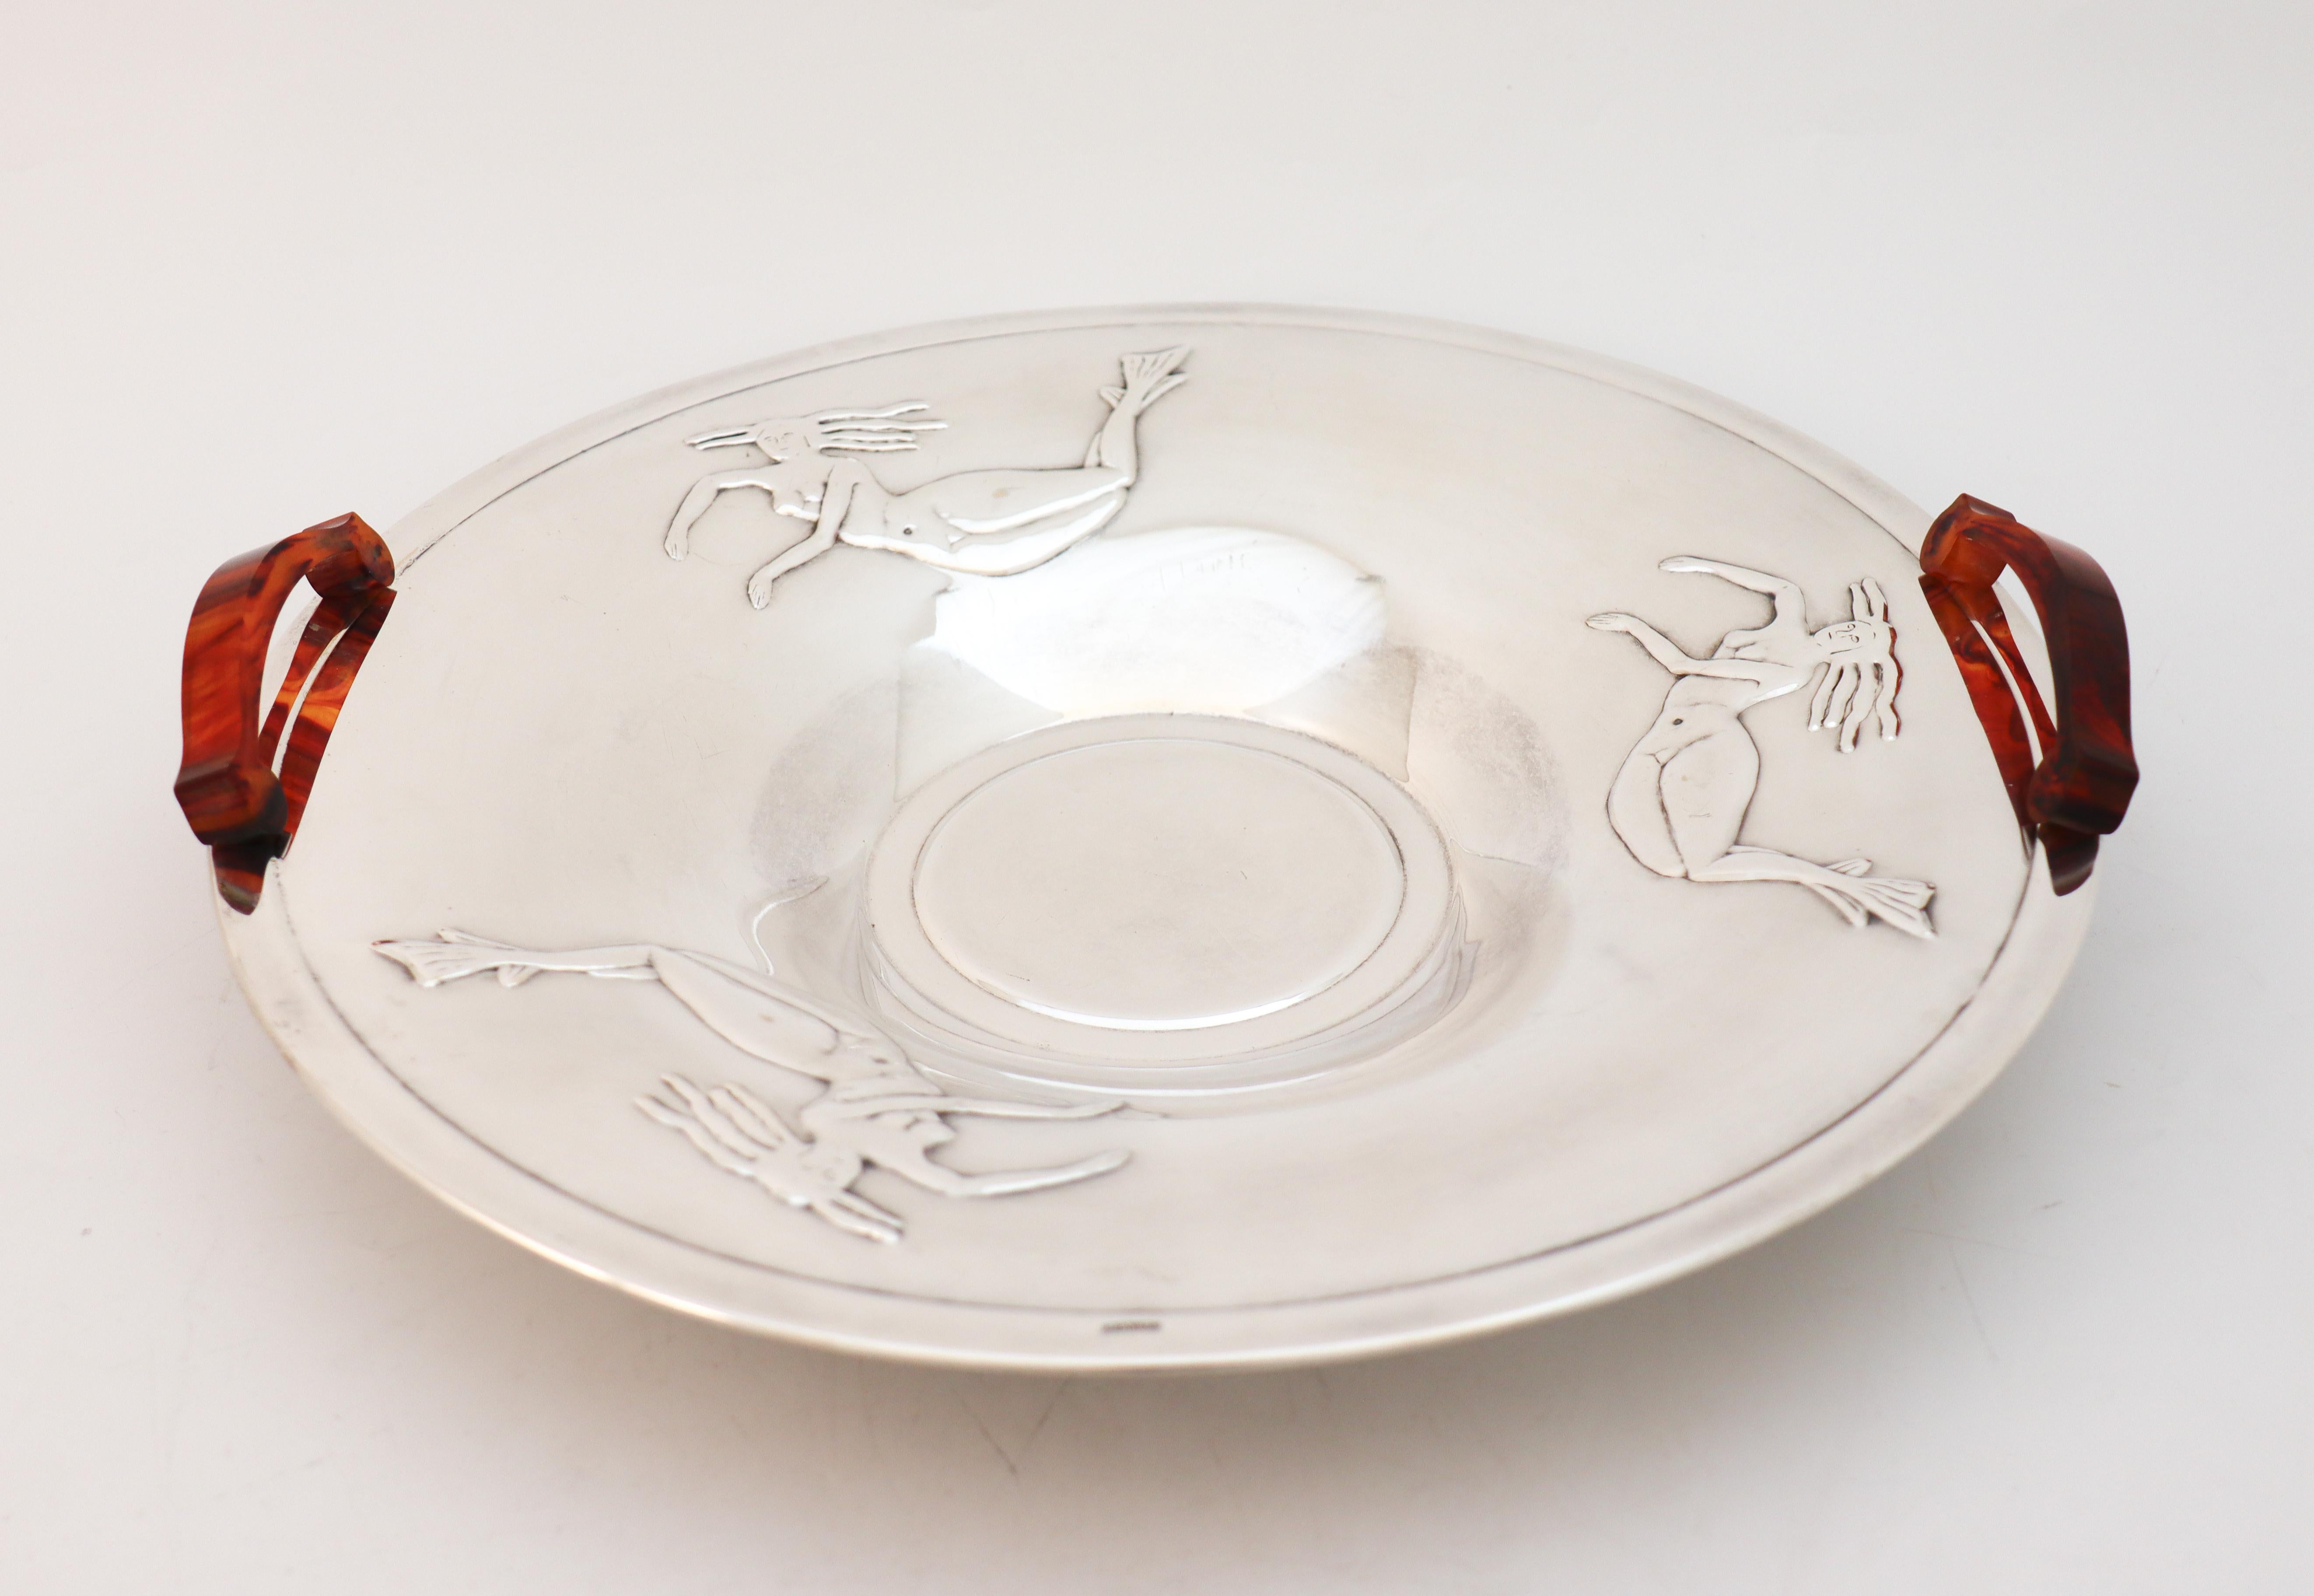 A lovely silver plated bowl with handles in amber or plastic. The bowl has a lovely decor of mermaids and is made in the 1930s or 1940s, it is made in lovely Swedish modern style. It is 35 cm (14